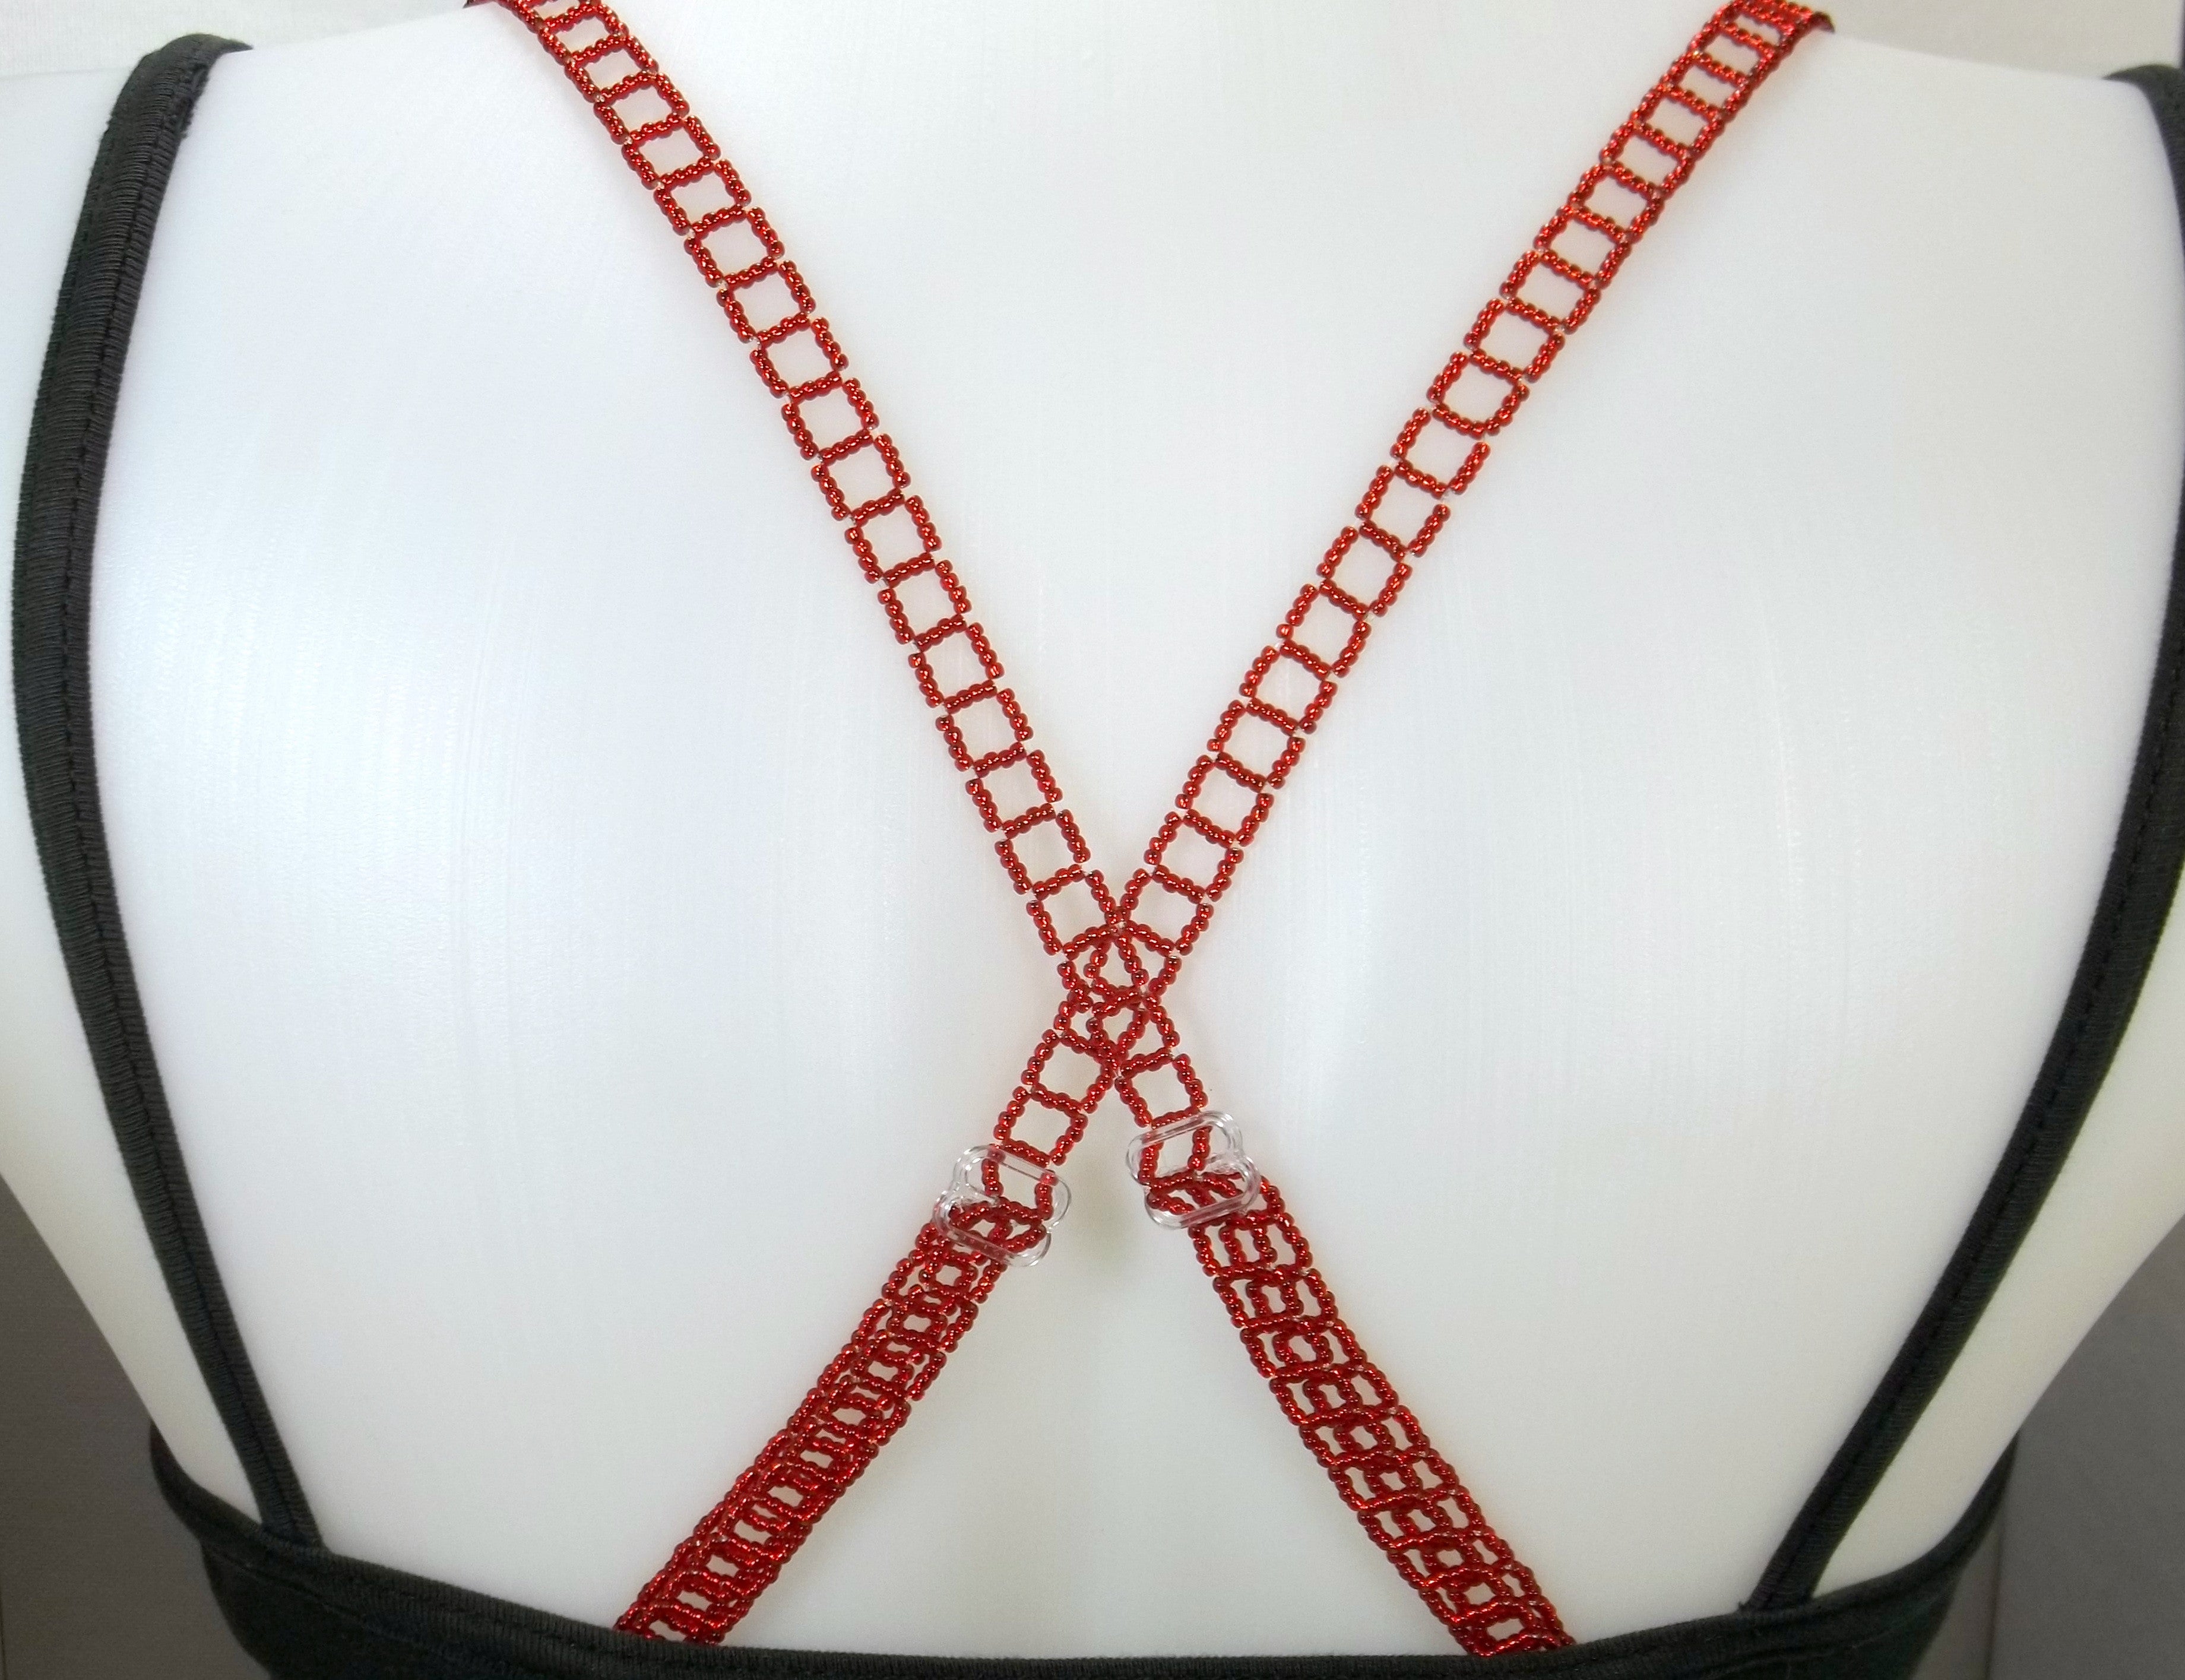 How to sew an adjustable bra strap